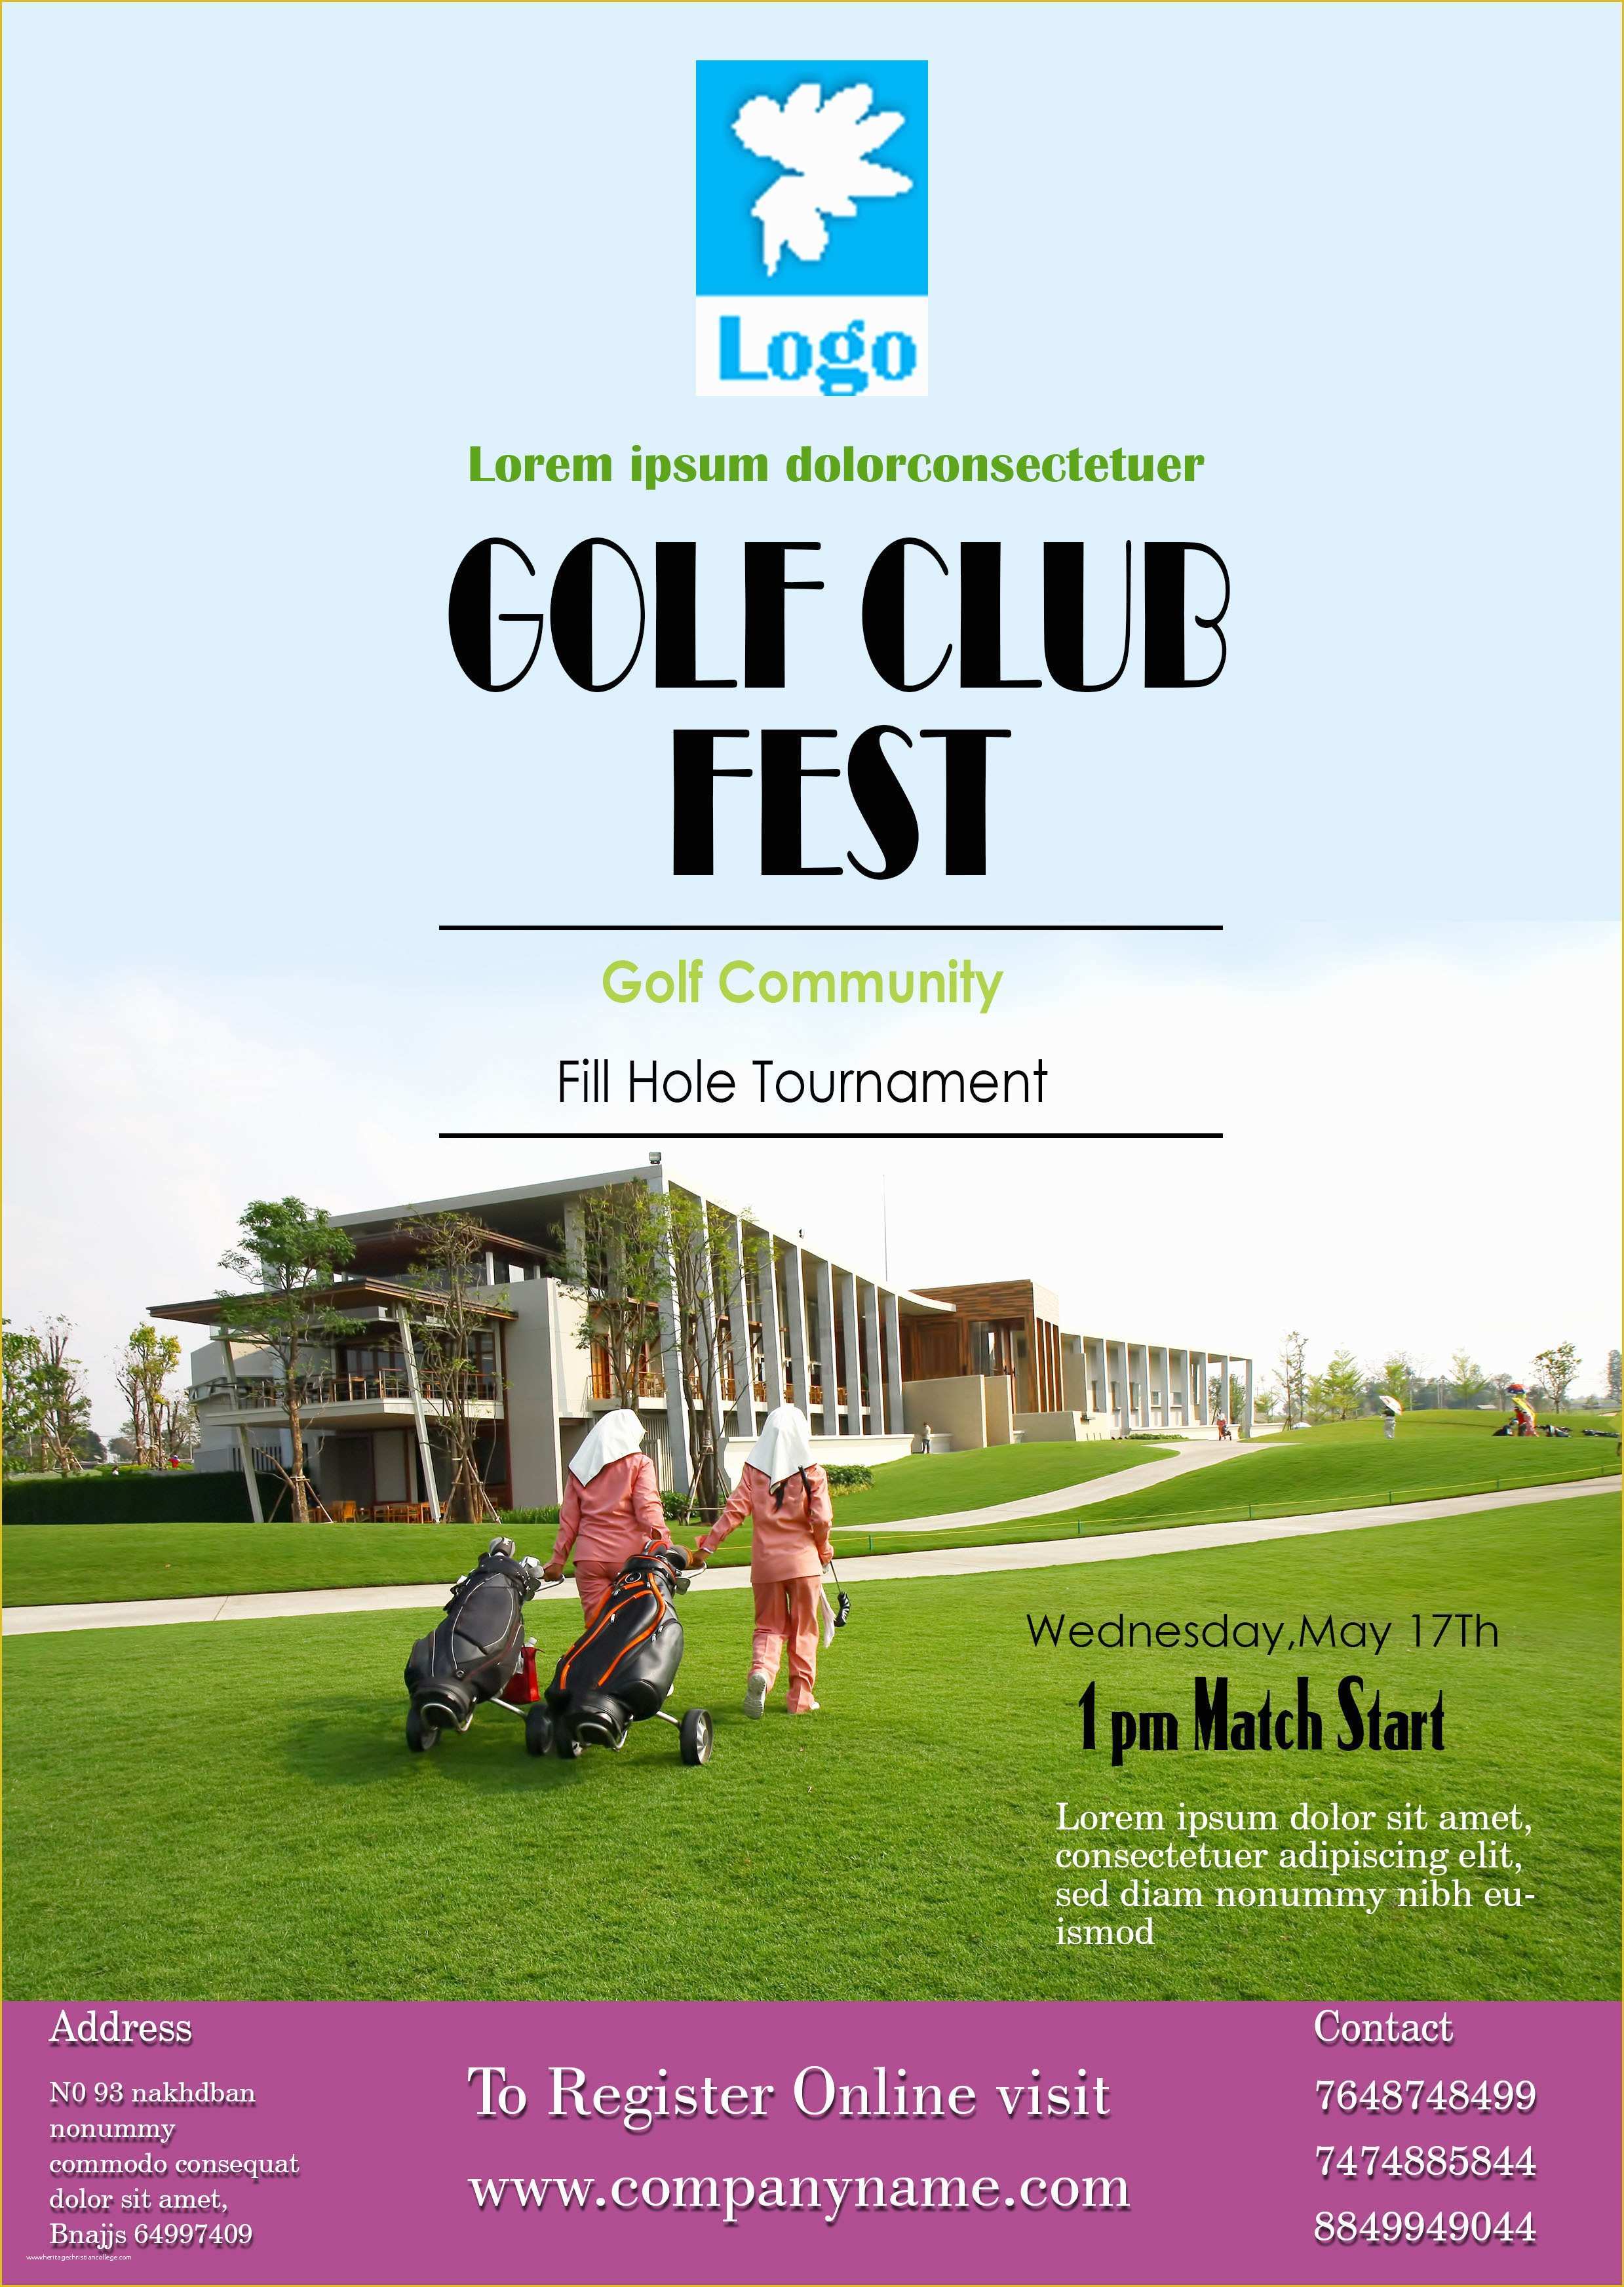 Free Golf tournament Flyer Template Of 15 Free Golf tournament Flyer Templates Fundraiser